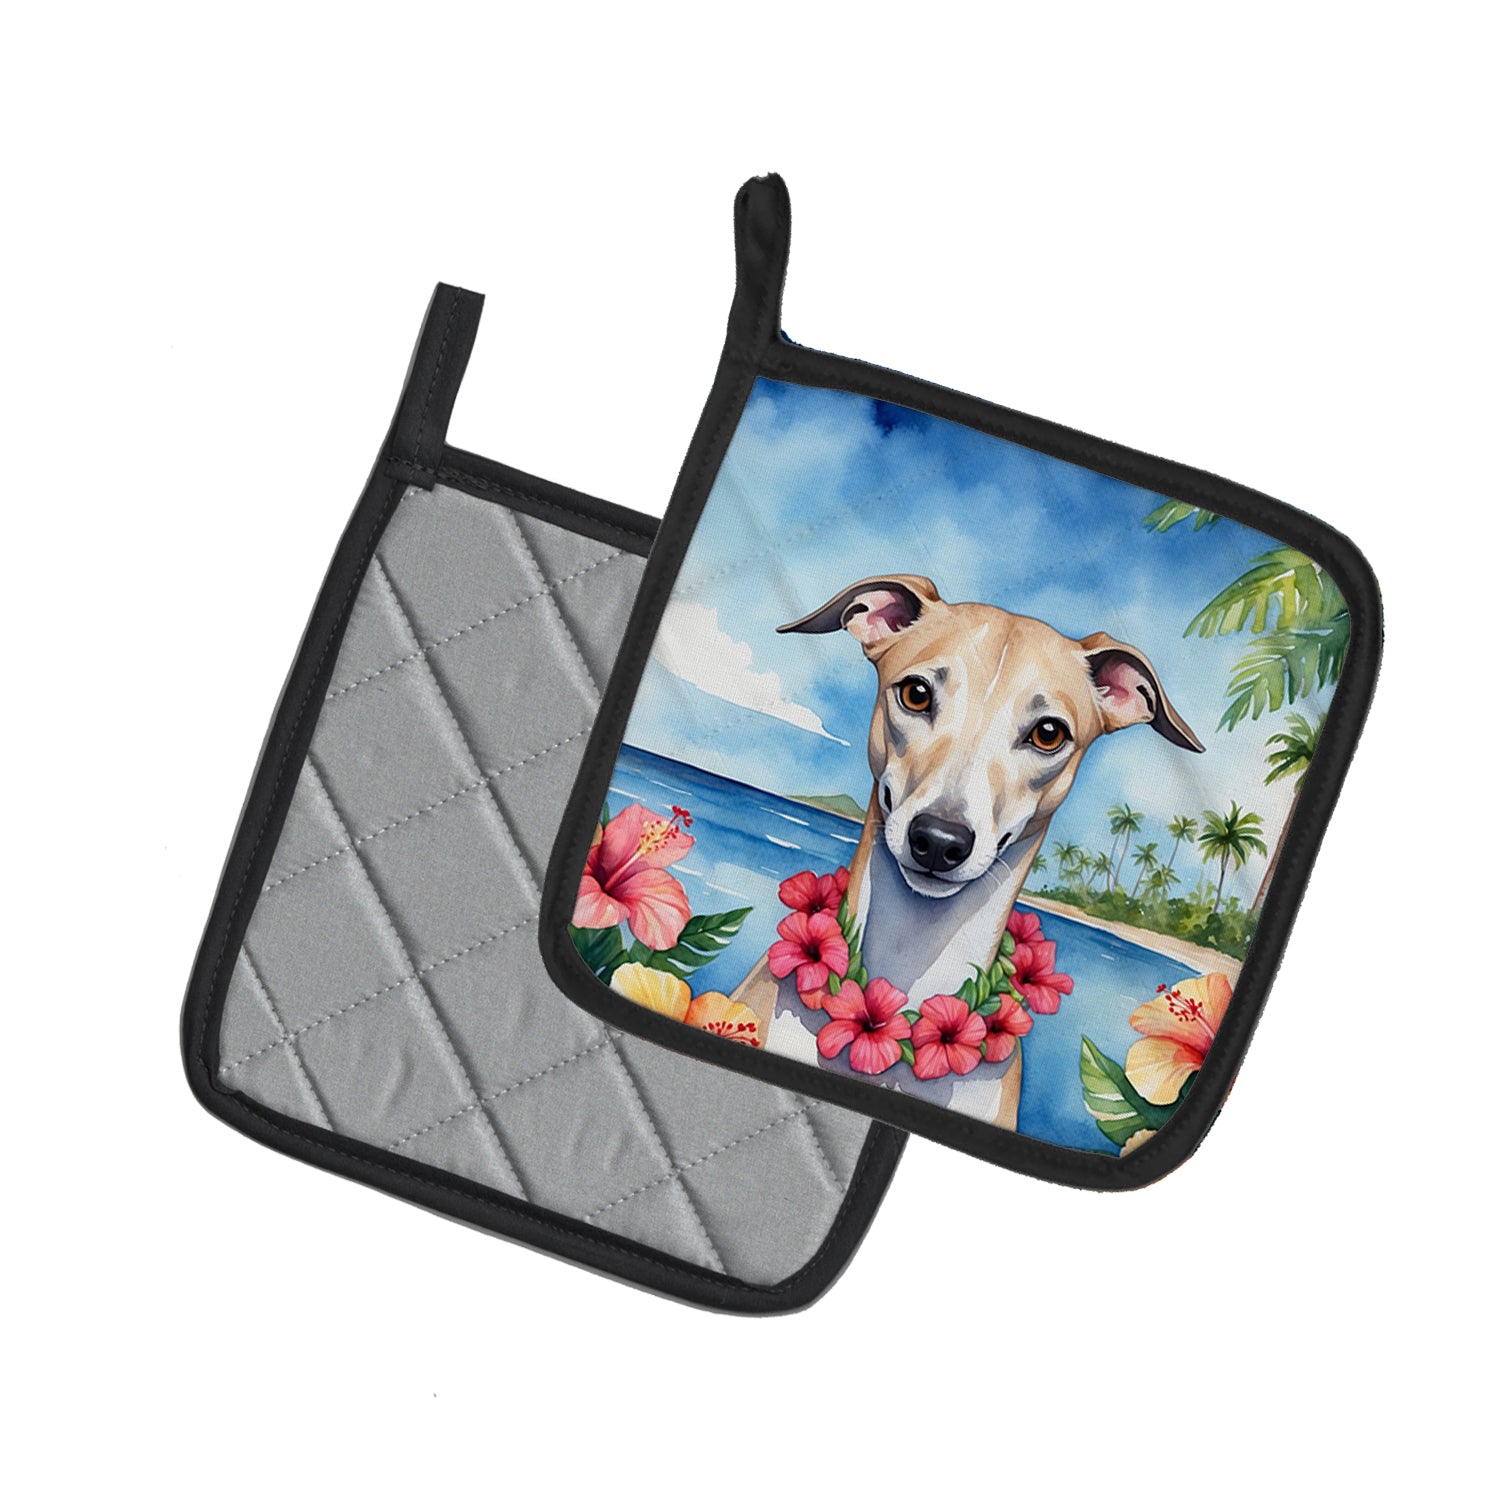 Buy this Whippet Luau Pair of Pot Holders